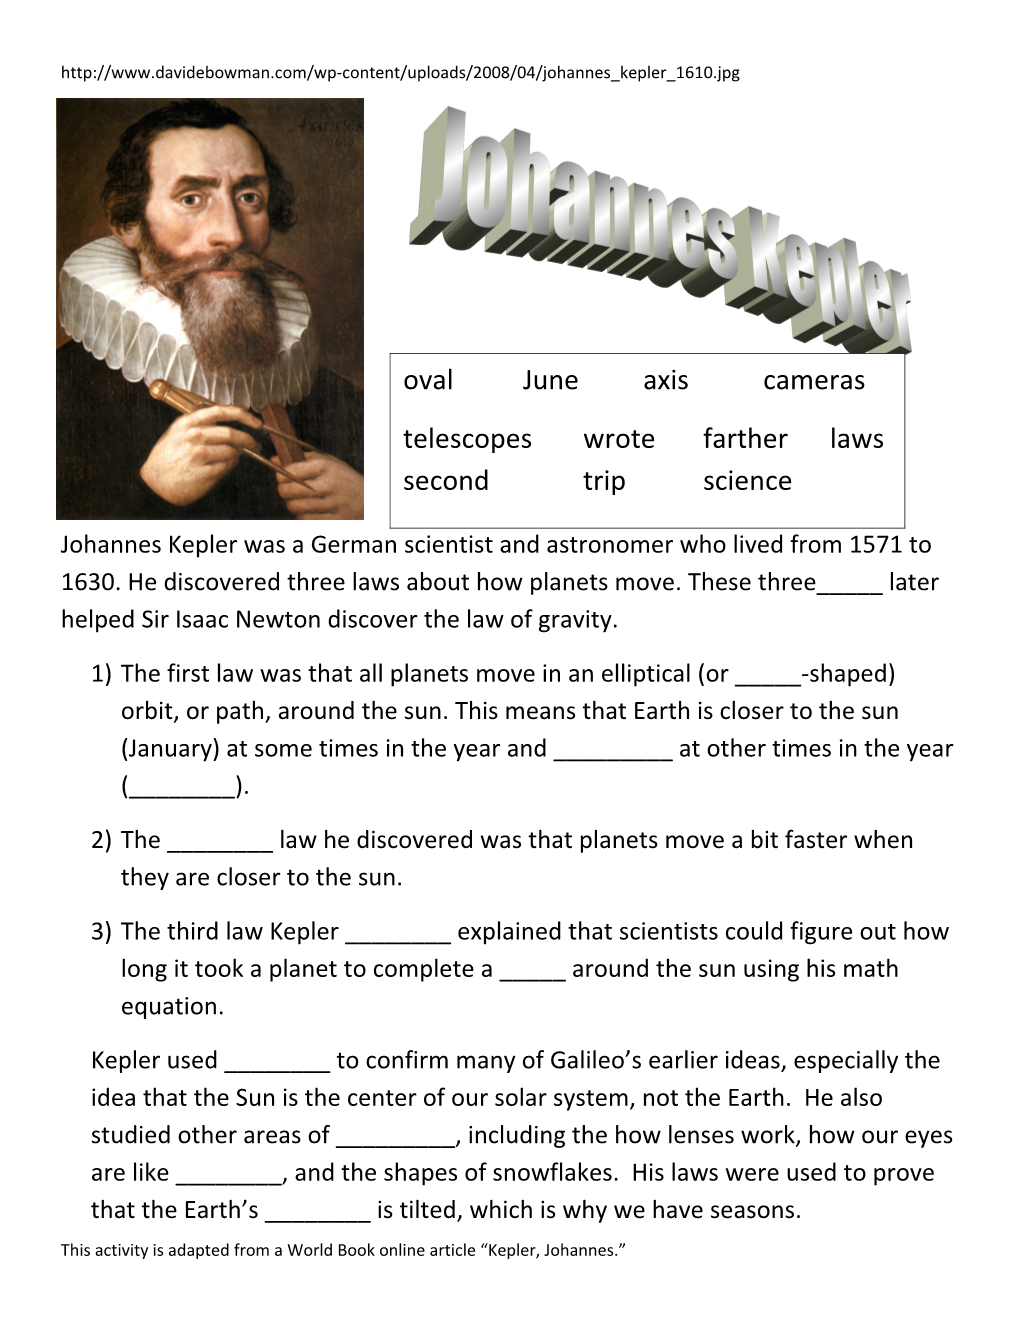 Johannes Kepler Was a German Scientist and Astronomer Who Lived from 1571 to 1630. He